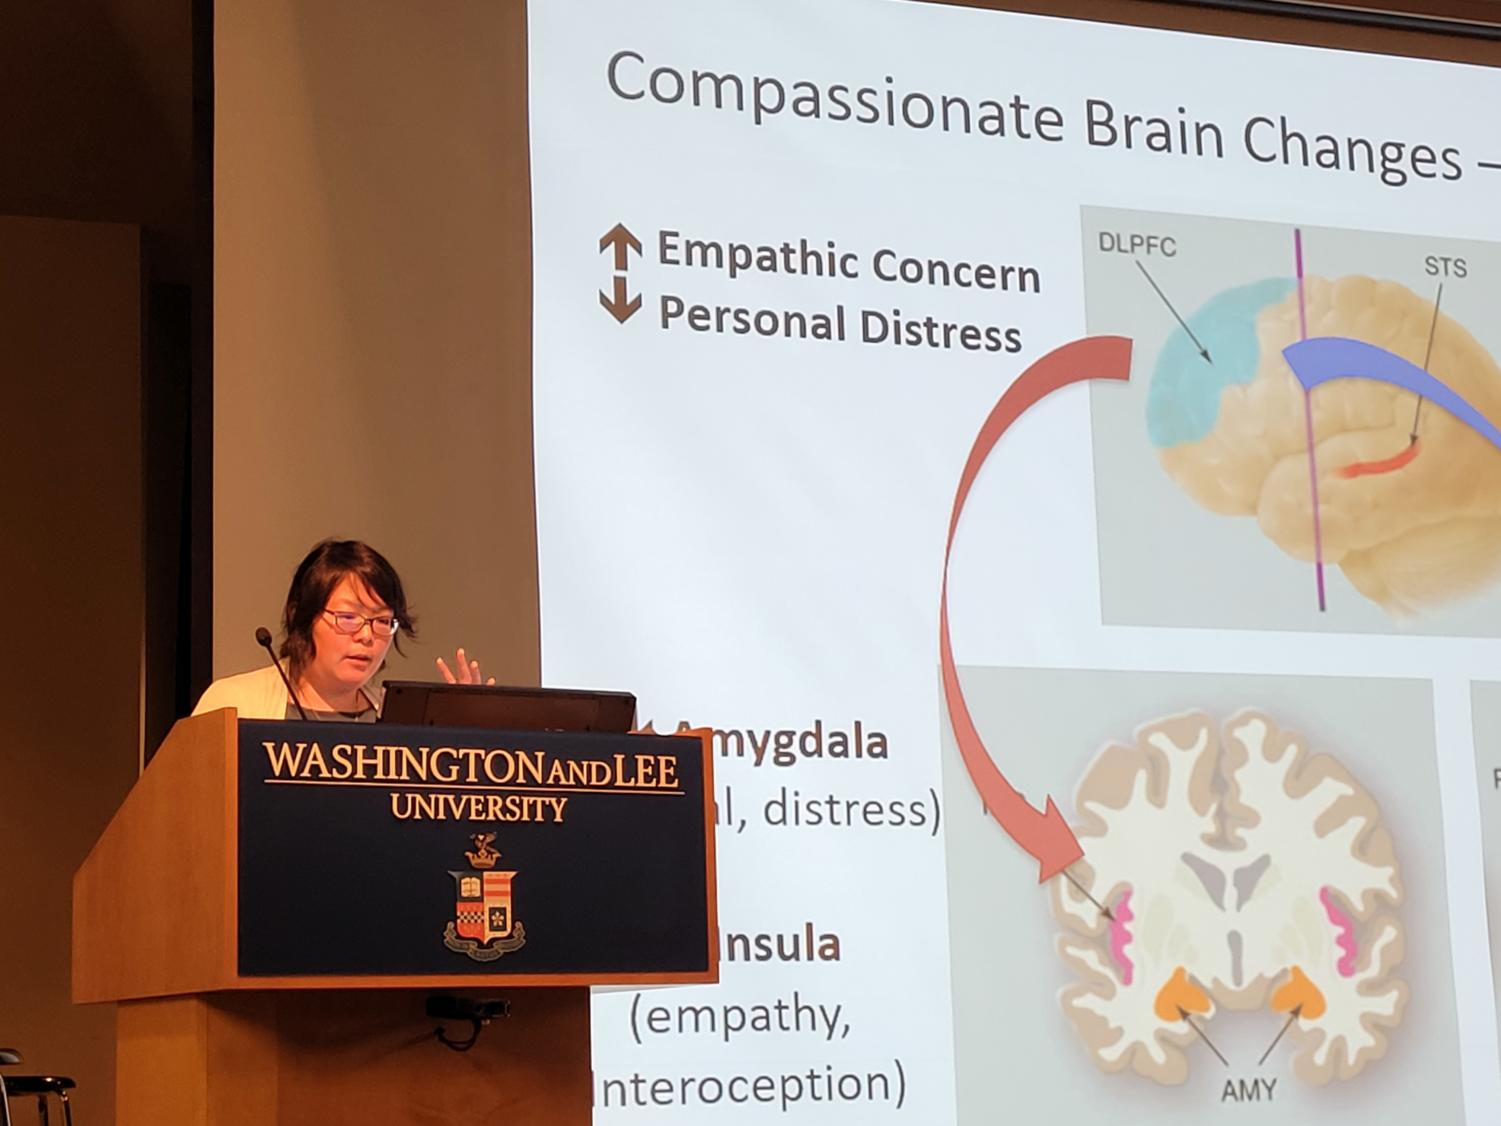 Dr. Helen Weng stands at a podium, gesturing and speaking. Behind her is a screen with the words "Compassion Brain Changes" with diagrams of a brain titled "Empathetic Concern" and "Personal Distress."